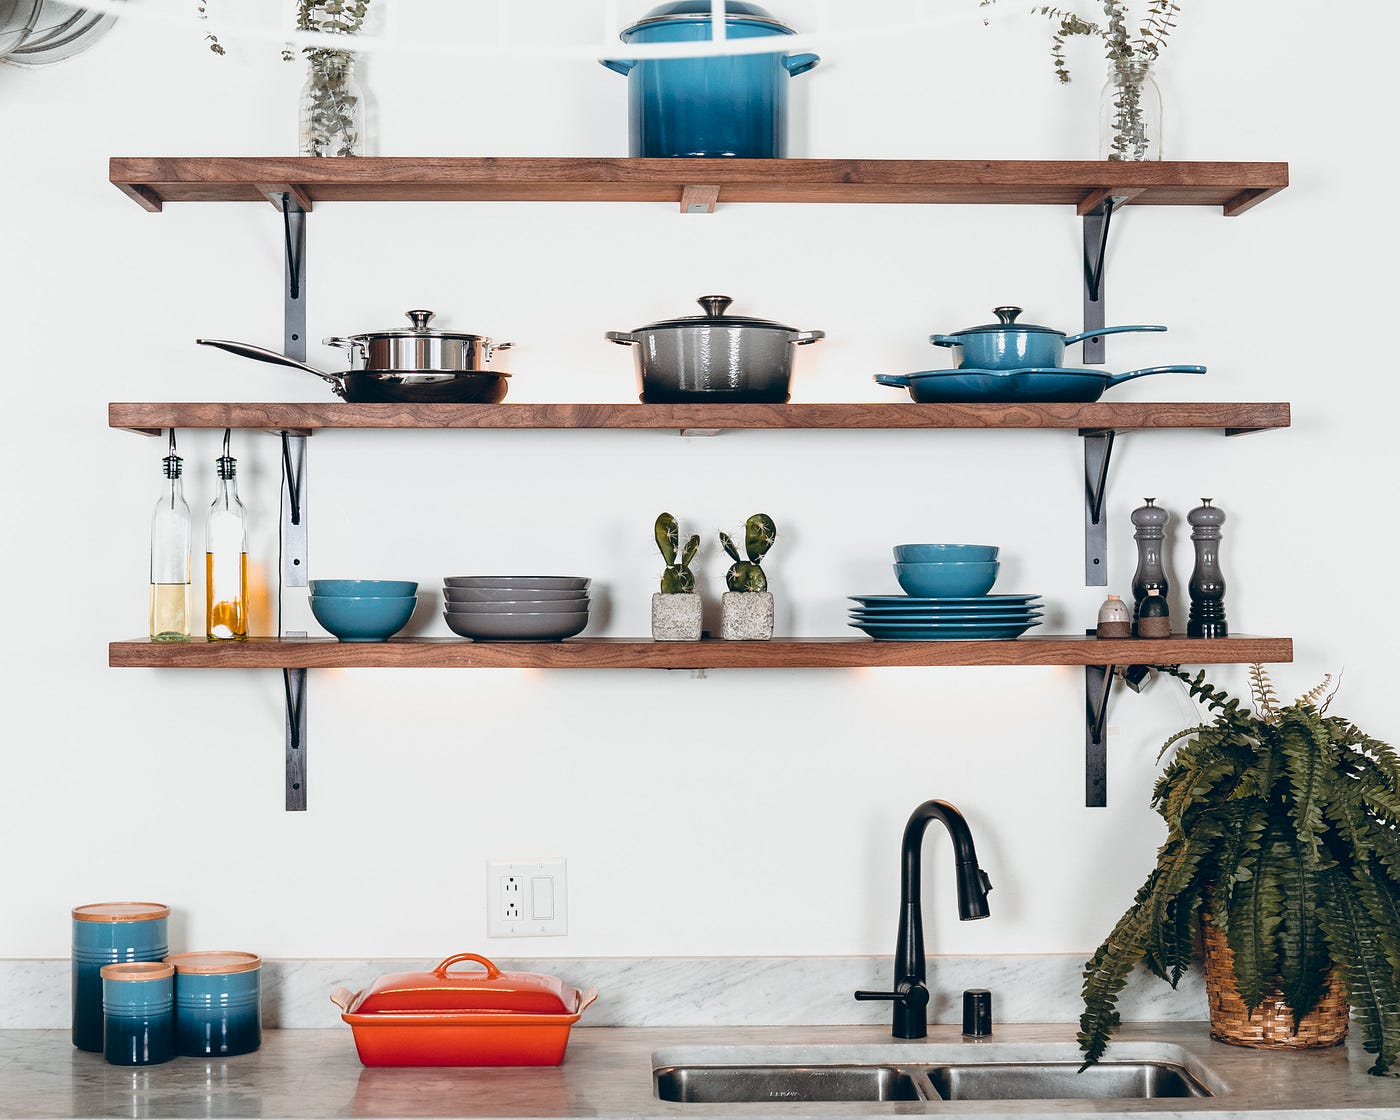 Upgrade your kitchen: The ultimate guide to small appliances